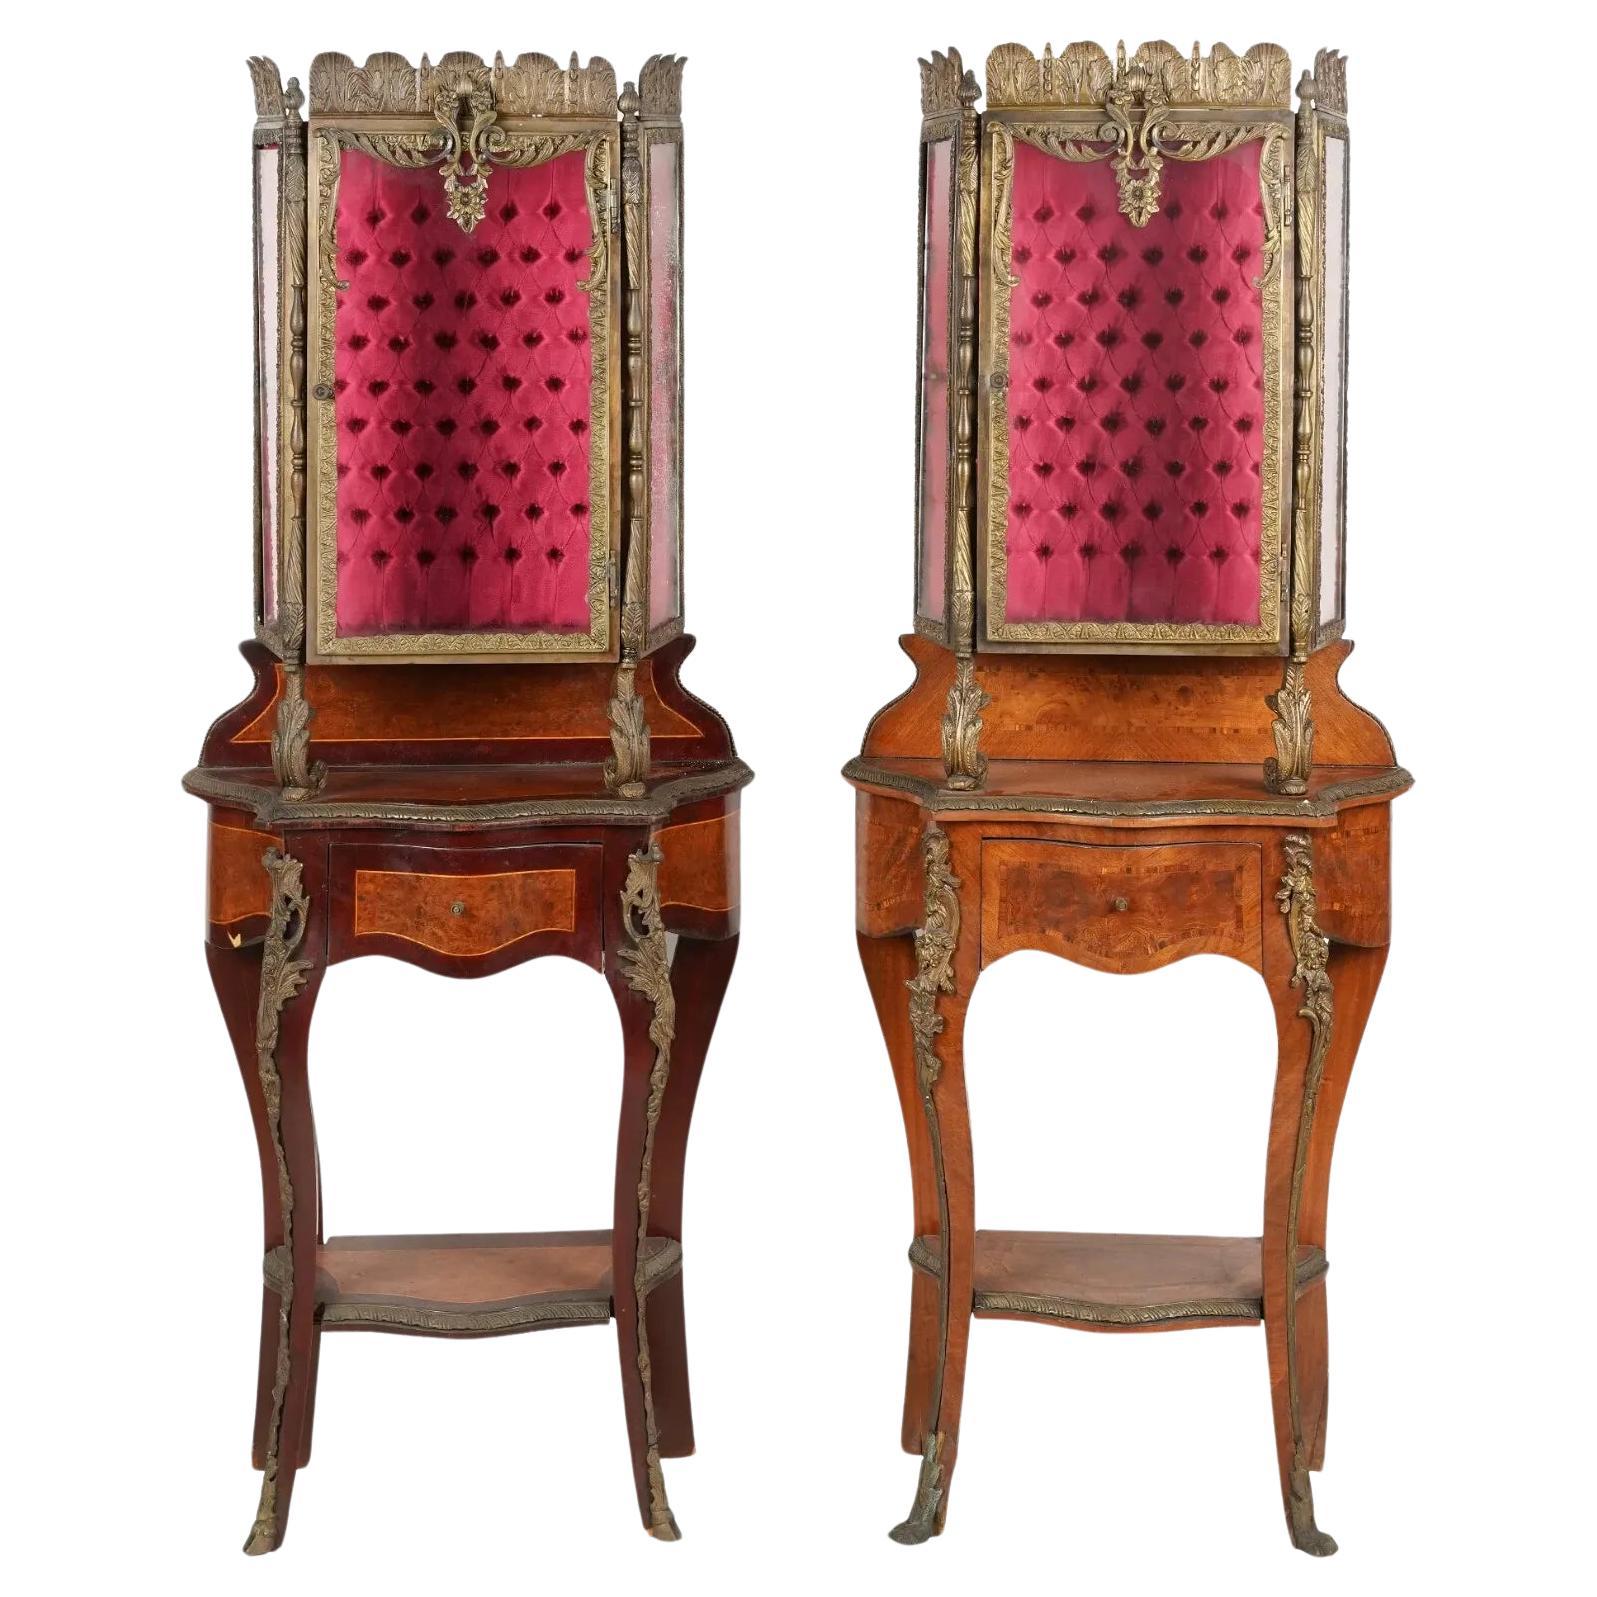 20th C. Collection of Larry Flynt, Pink, Vintage Vitrine Cabinets, Set of Two! For Sale